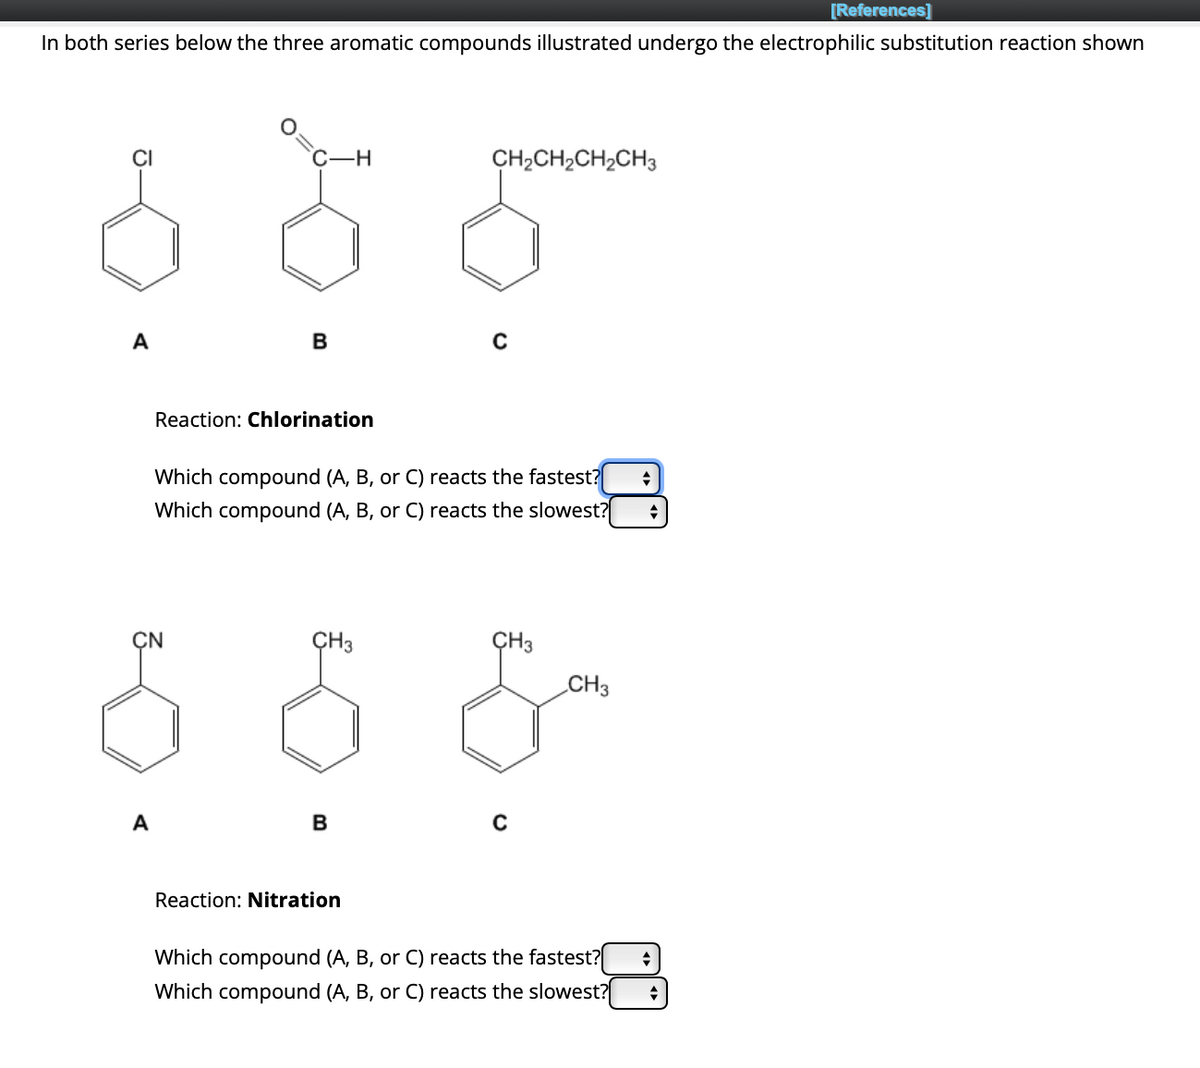 In both series below the three aromatic compounds illustrated undergo the electrophilic substitution reaction shown
A
A
C-H
CN
B
Reaction: Chlorination
Which compound (A, B, or C) reacts the fastest? ◆
Which compound (A, B, or C) reacts the slowest? +
CH3
B
CH2CH2CH2CH3
Reaction: Nitration
C
CH3
C
CH3
Which compound (A, B, or C) reacts the fastest?
Which compound (A, B, or C) reacts the slowest?
+
[References]
♦